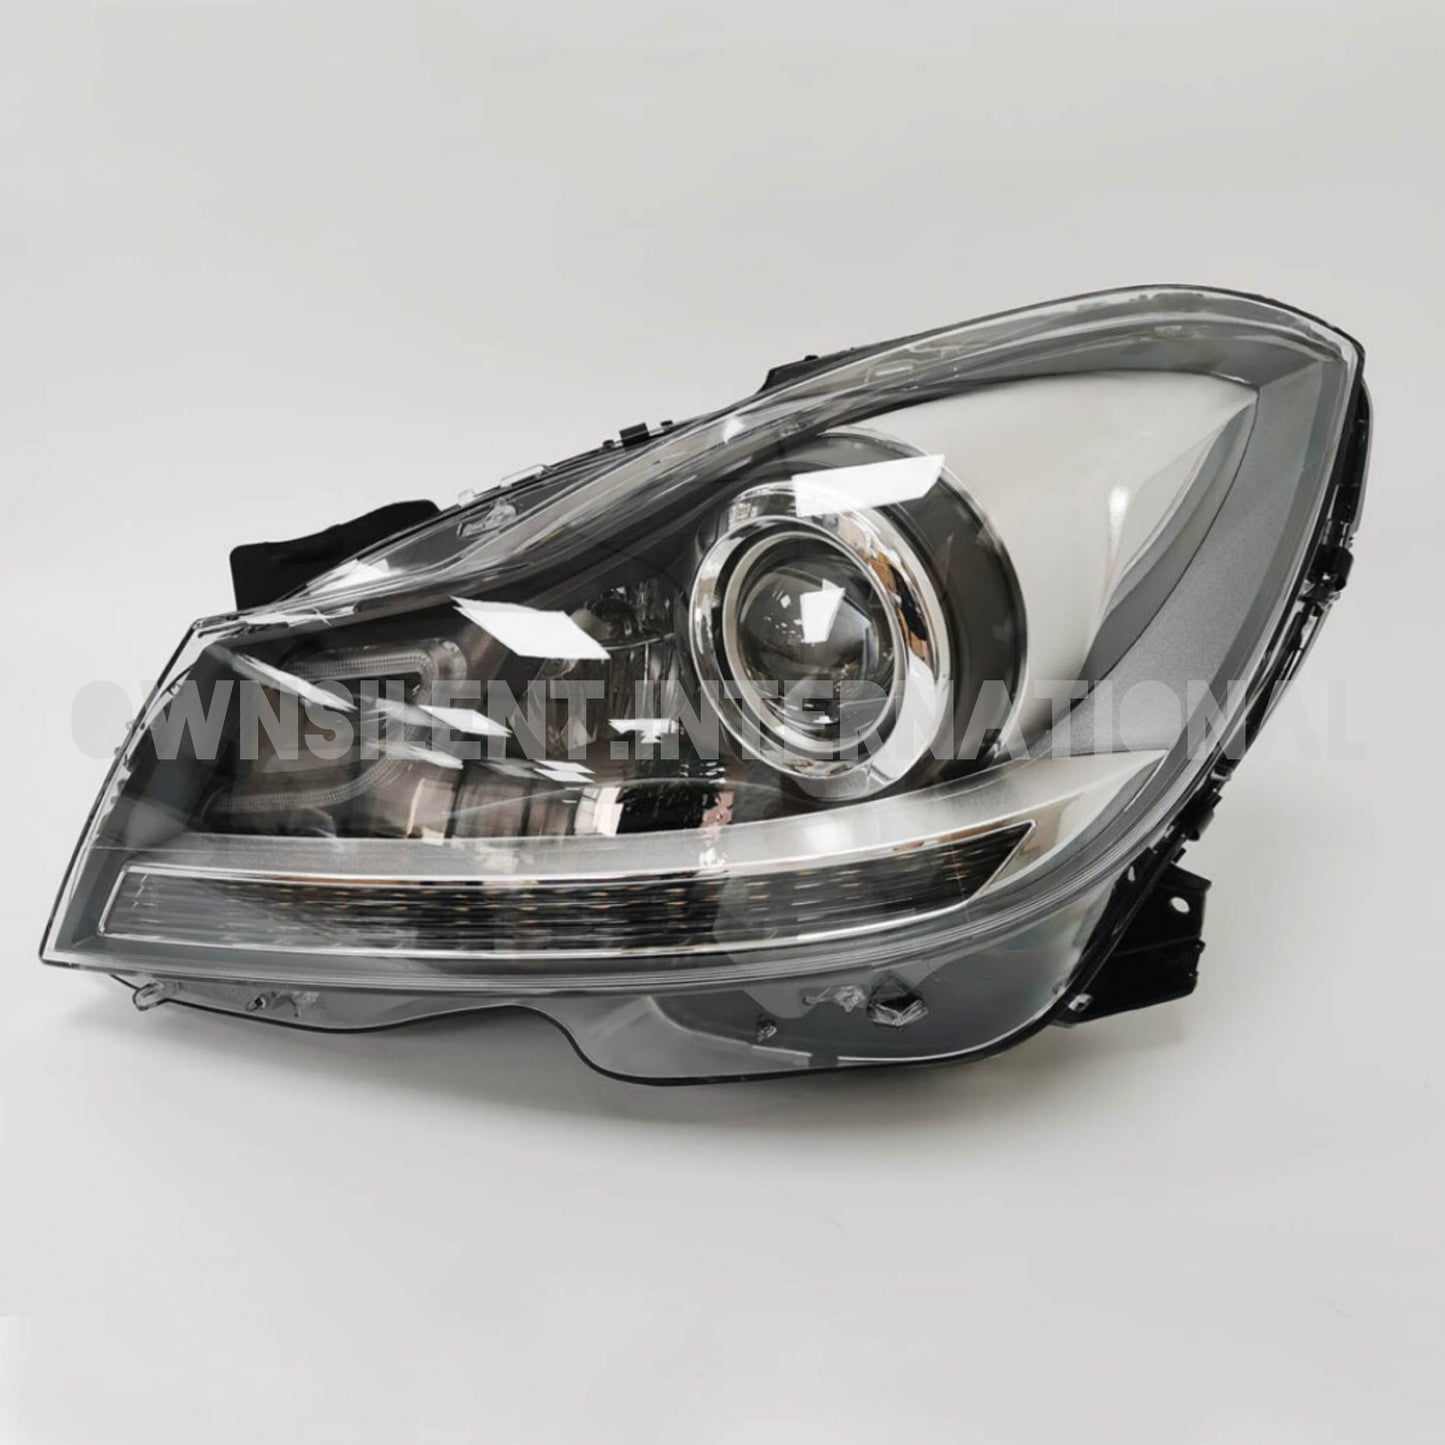 W204 Headlight Upgrade DRL LED Tube Projector Fits For 2012-2014 Mercedes C180, C250, C300, C350, C63